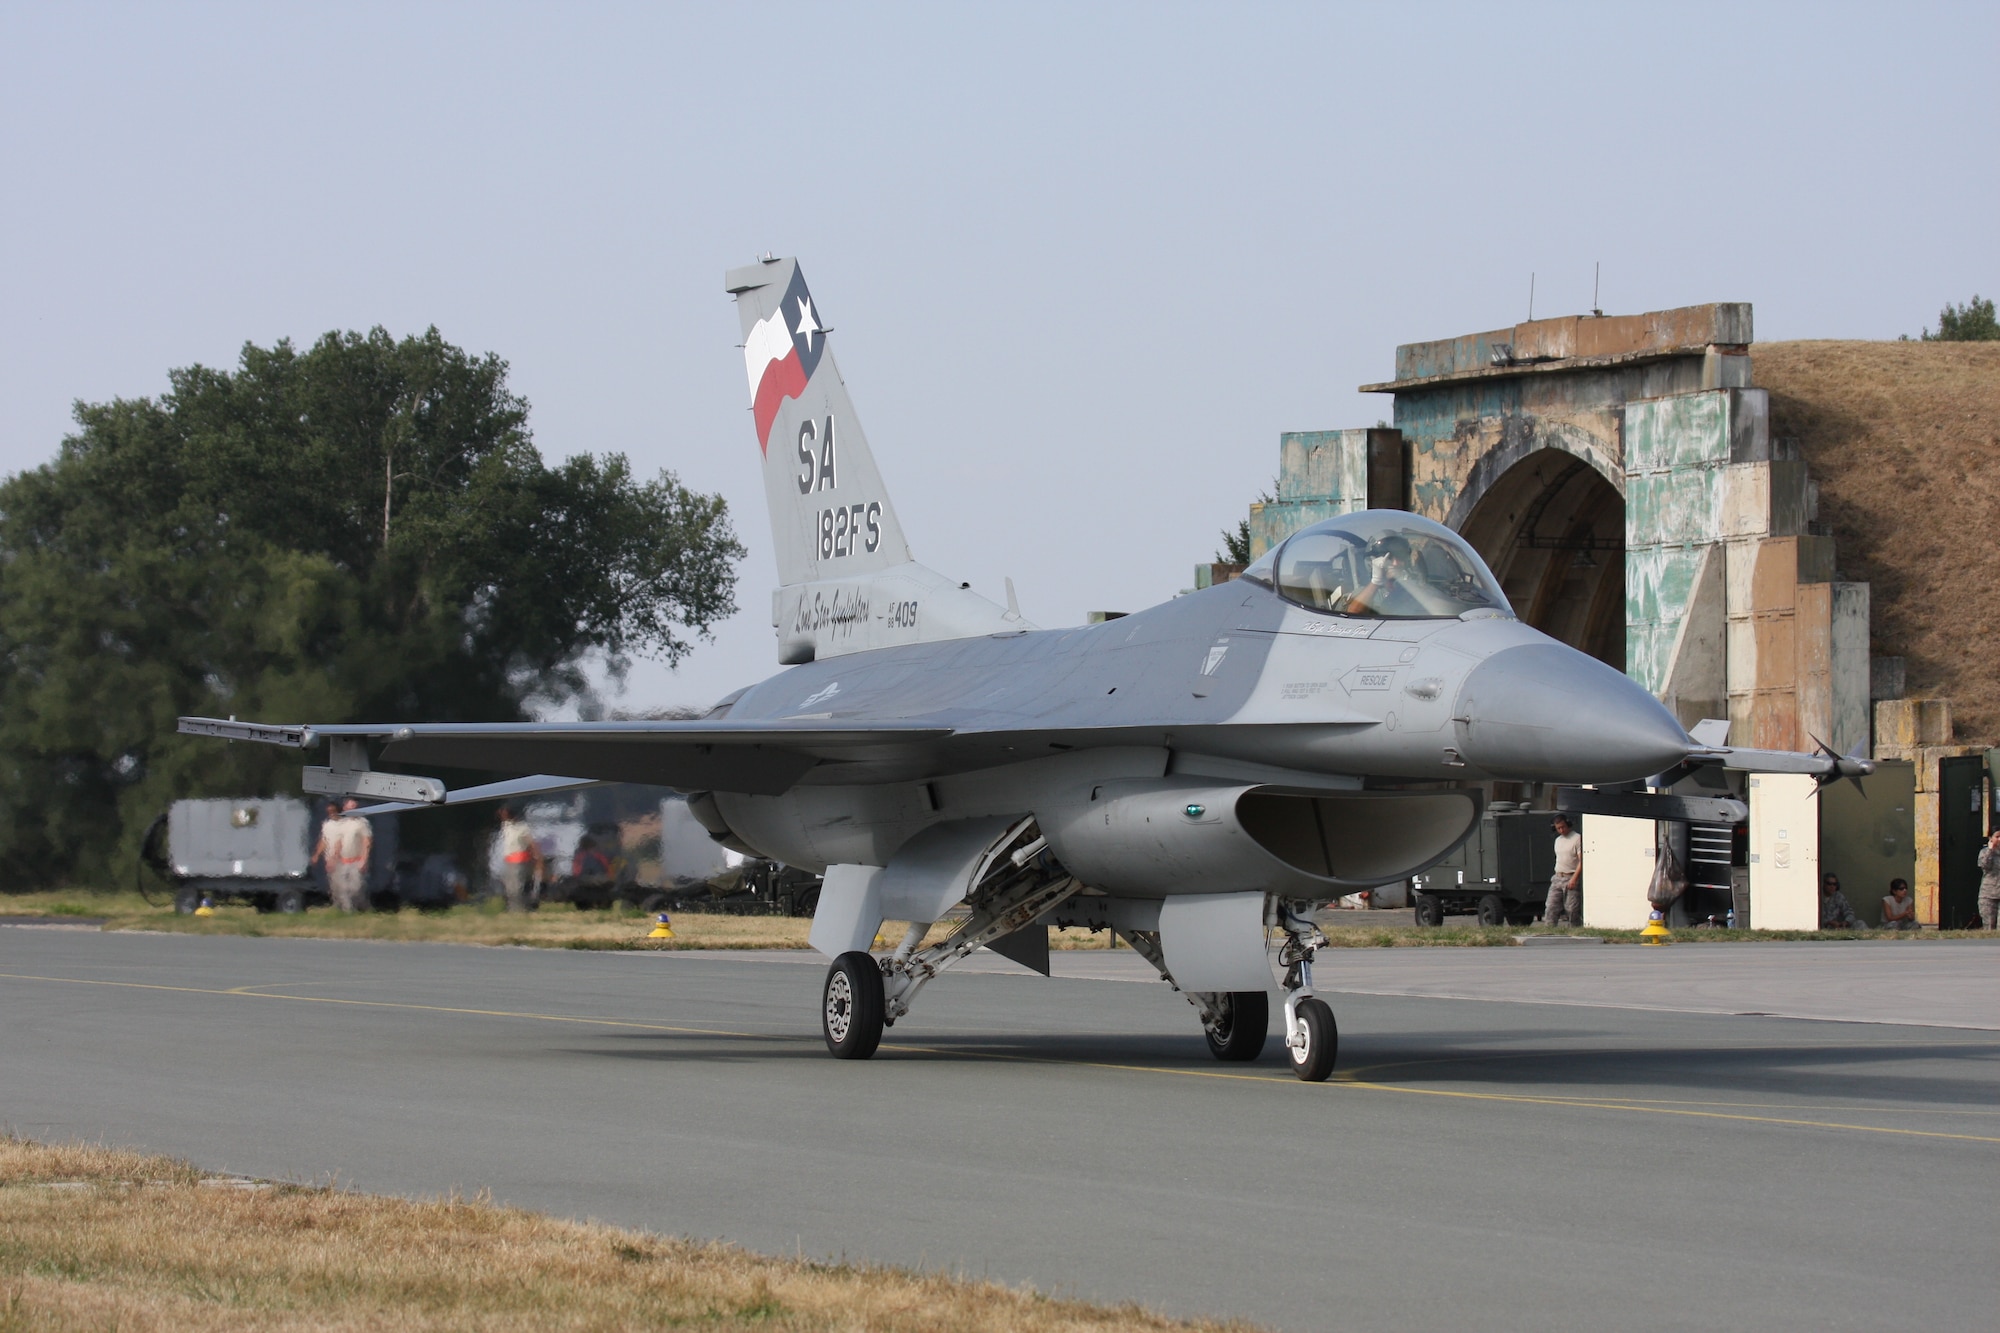 An F-16 taxis at Caslav Air Base after a flight.  Members of the Texas Air National Guard’s 149th Fighter Wing were in the Czech Republic conducting mutual training as part of the National Guard’s state partnership program.  (U.S. Air Force photo by Capt Randy Saldivar)